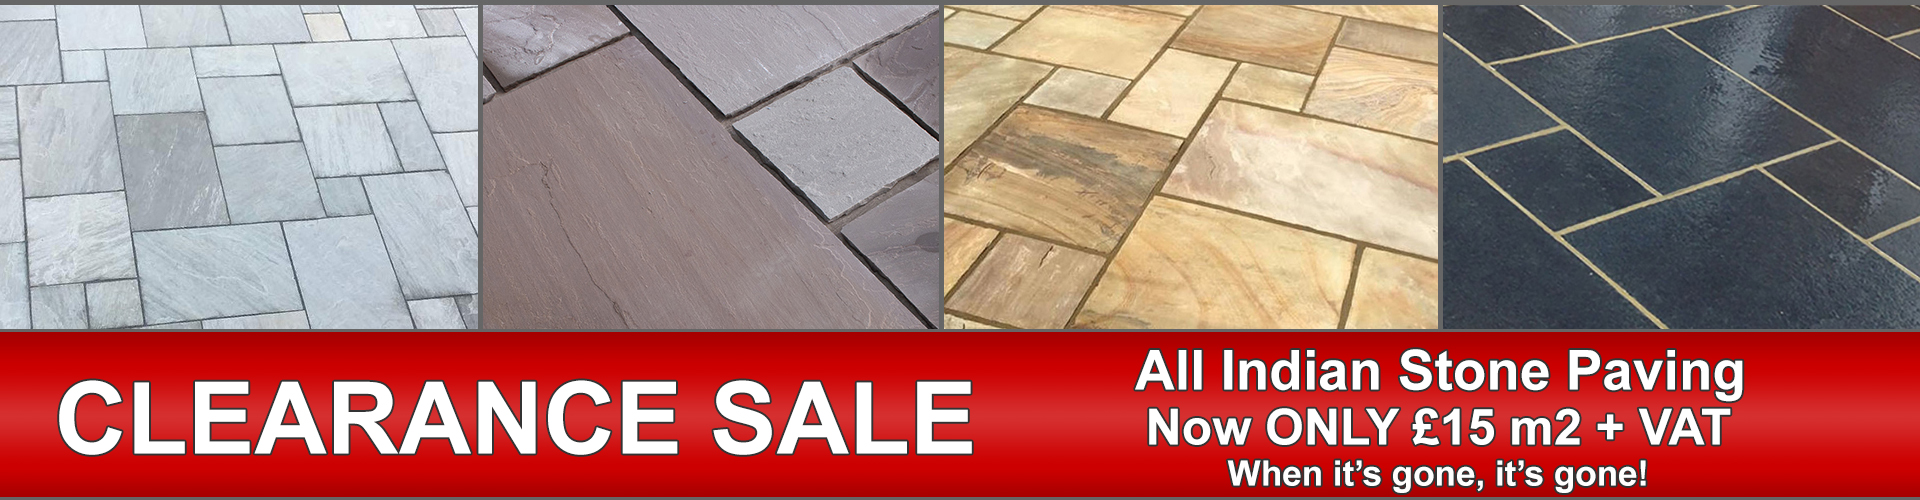 Clearance of Indian Stone Paving